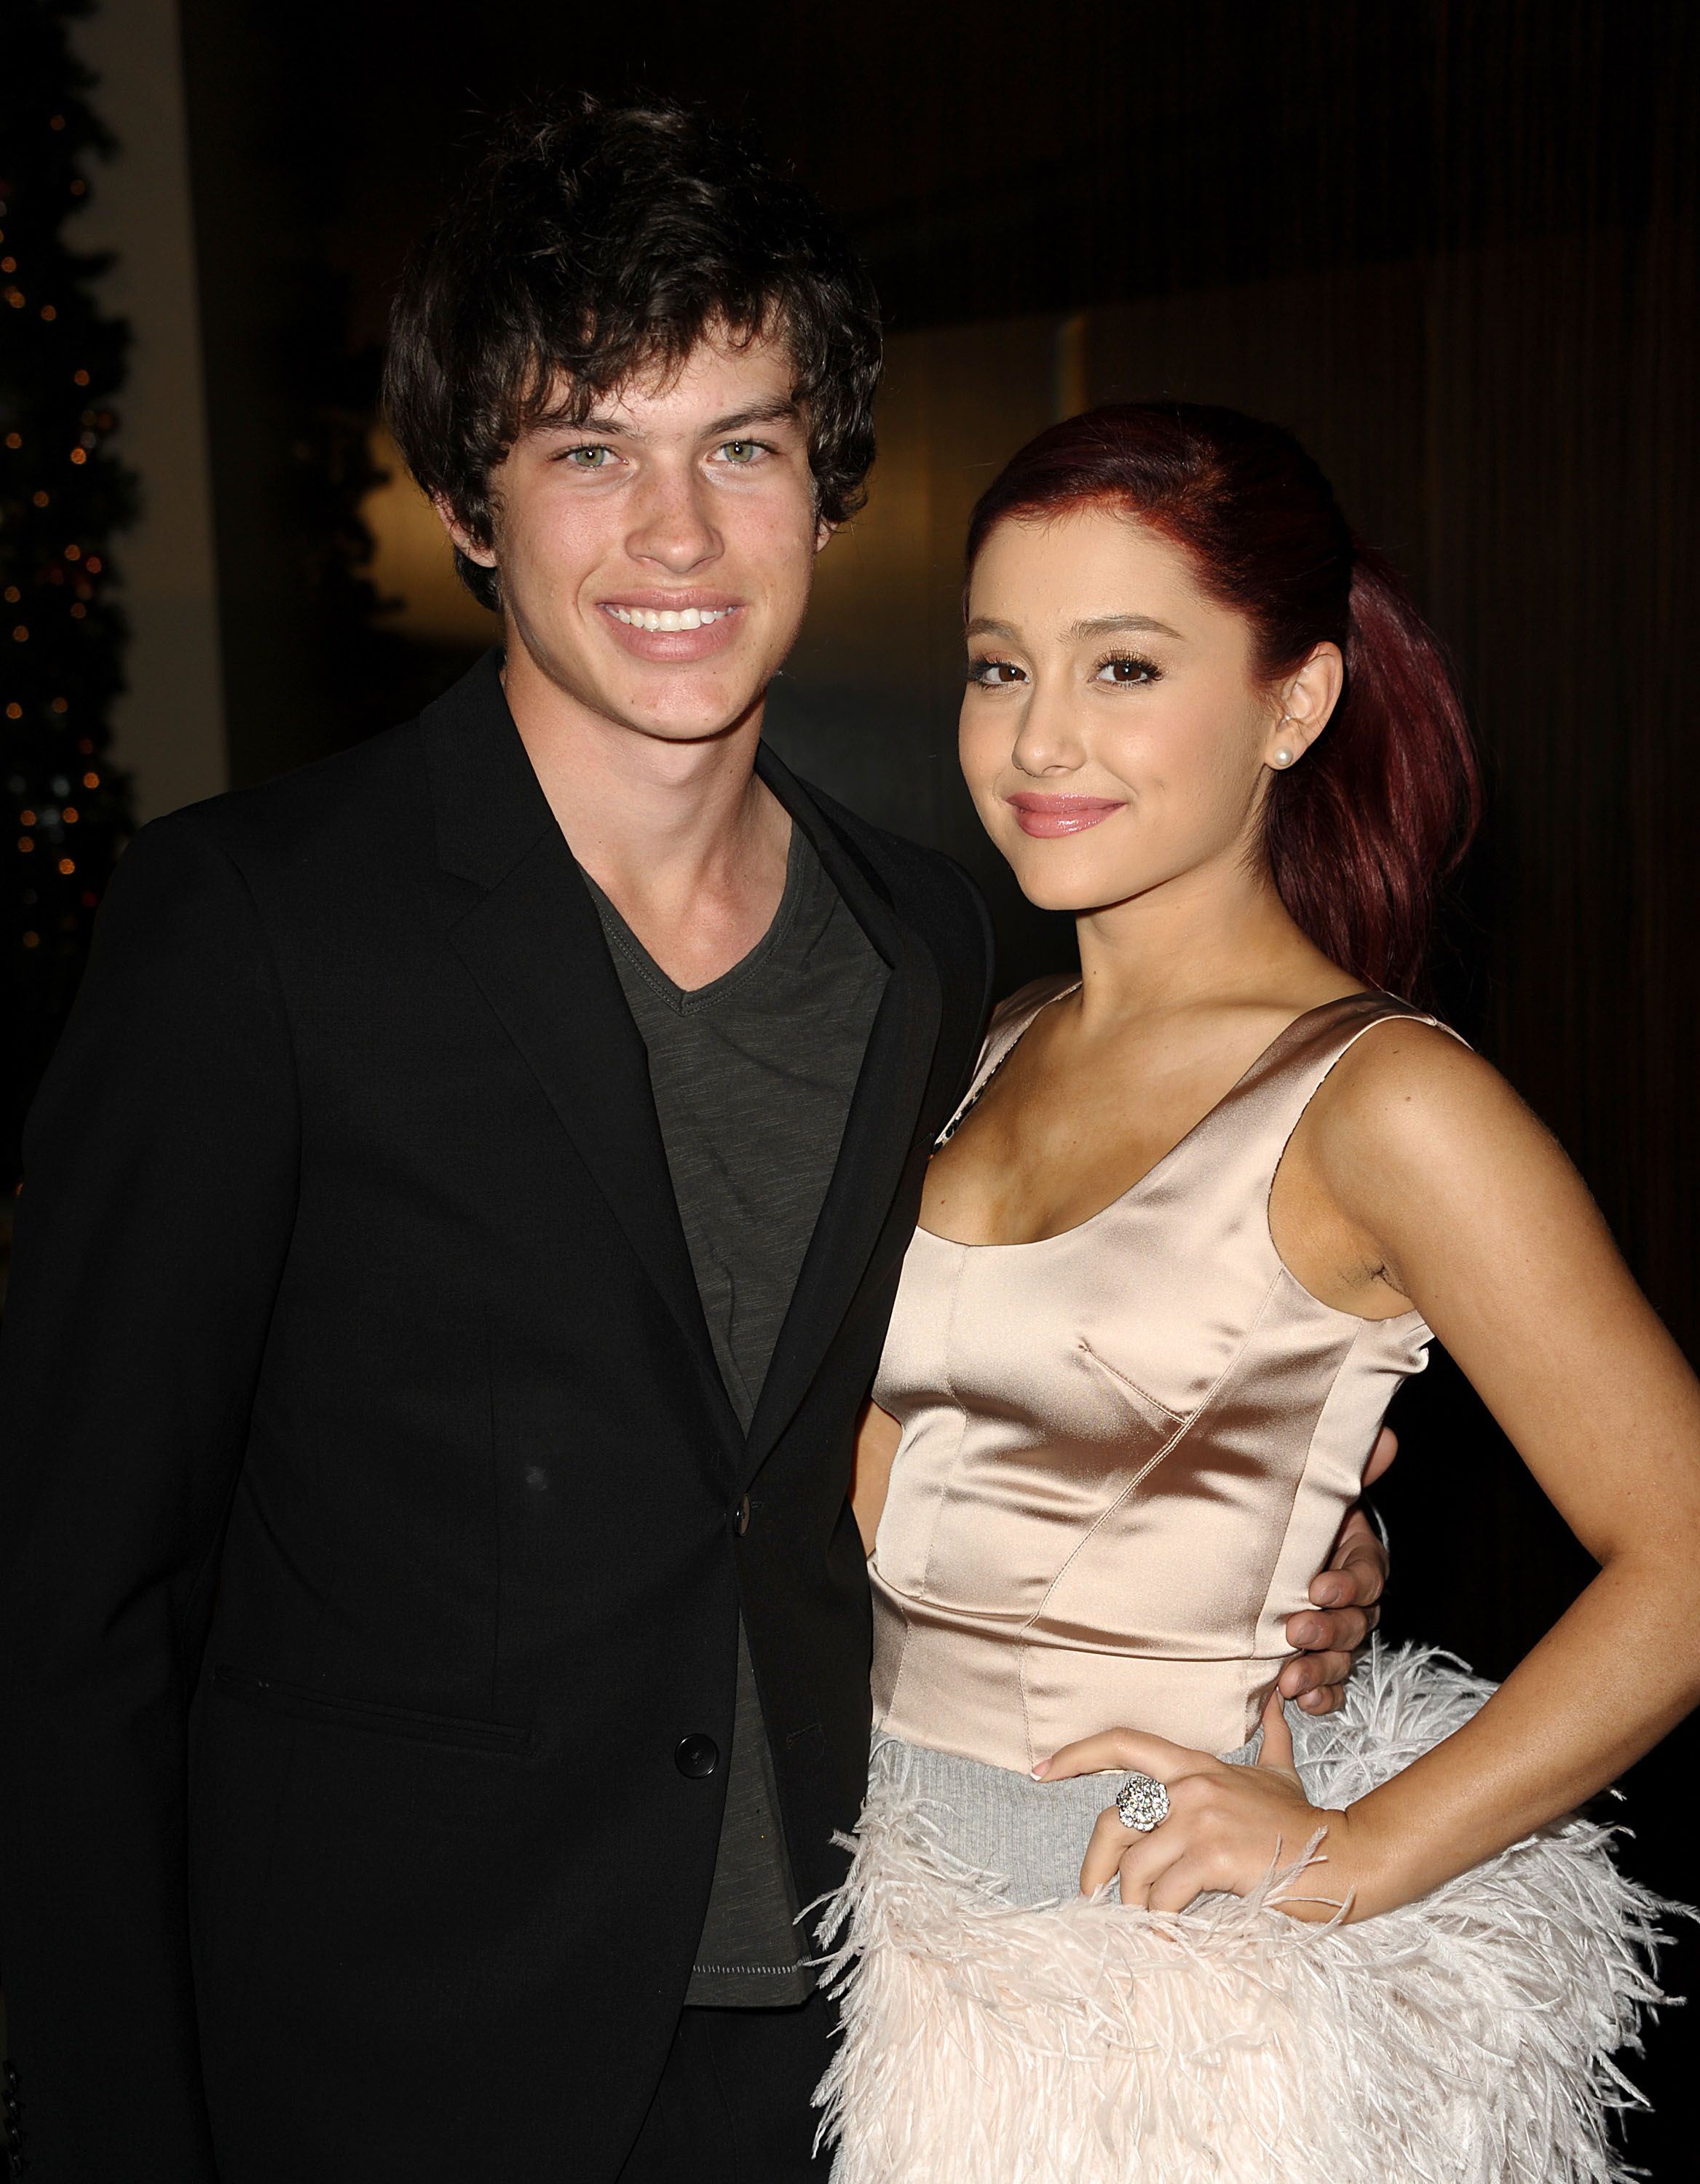 Elizabeth Gillies And Ariana Grande Porn - Ariana Grande Went Out With Ex-Boyfriend Graham Phillips in New York City - Ariana  Grande Dating Rumors